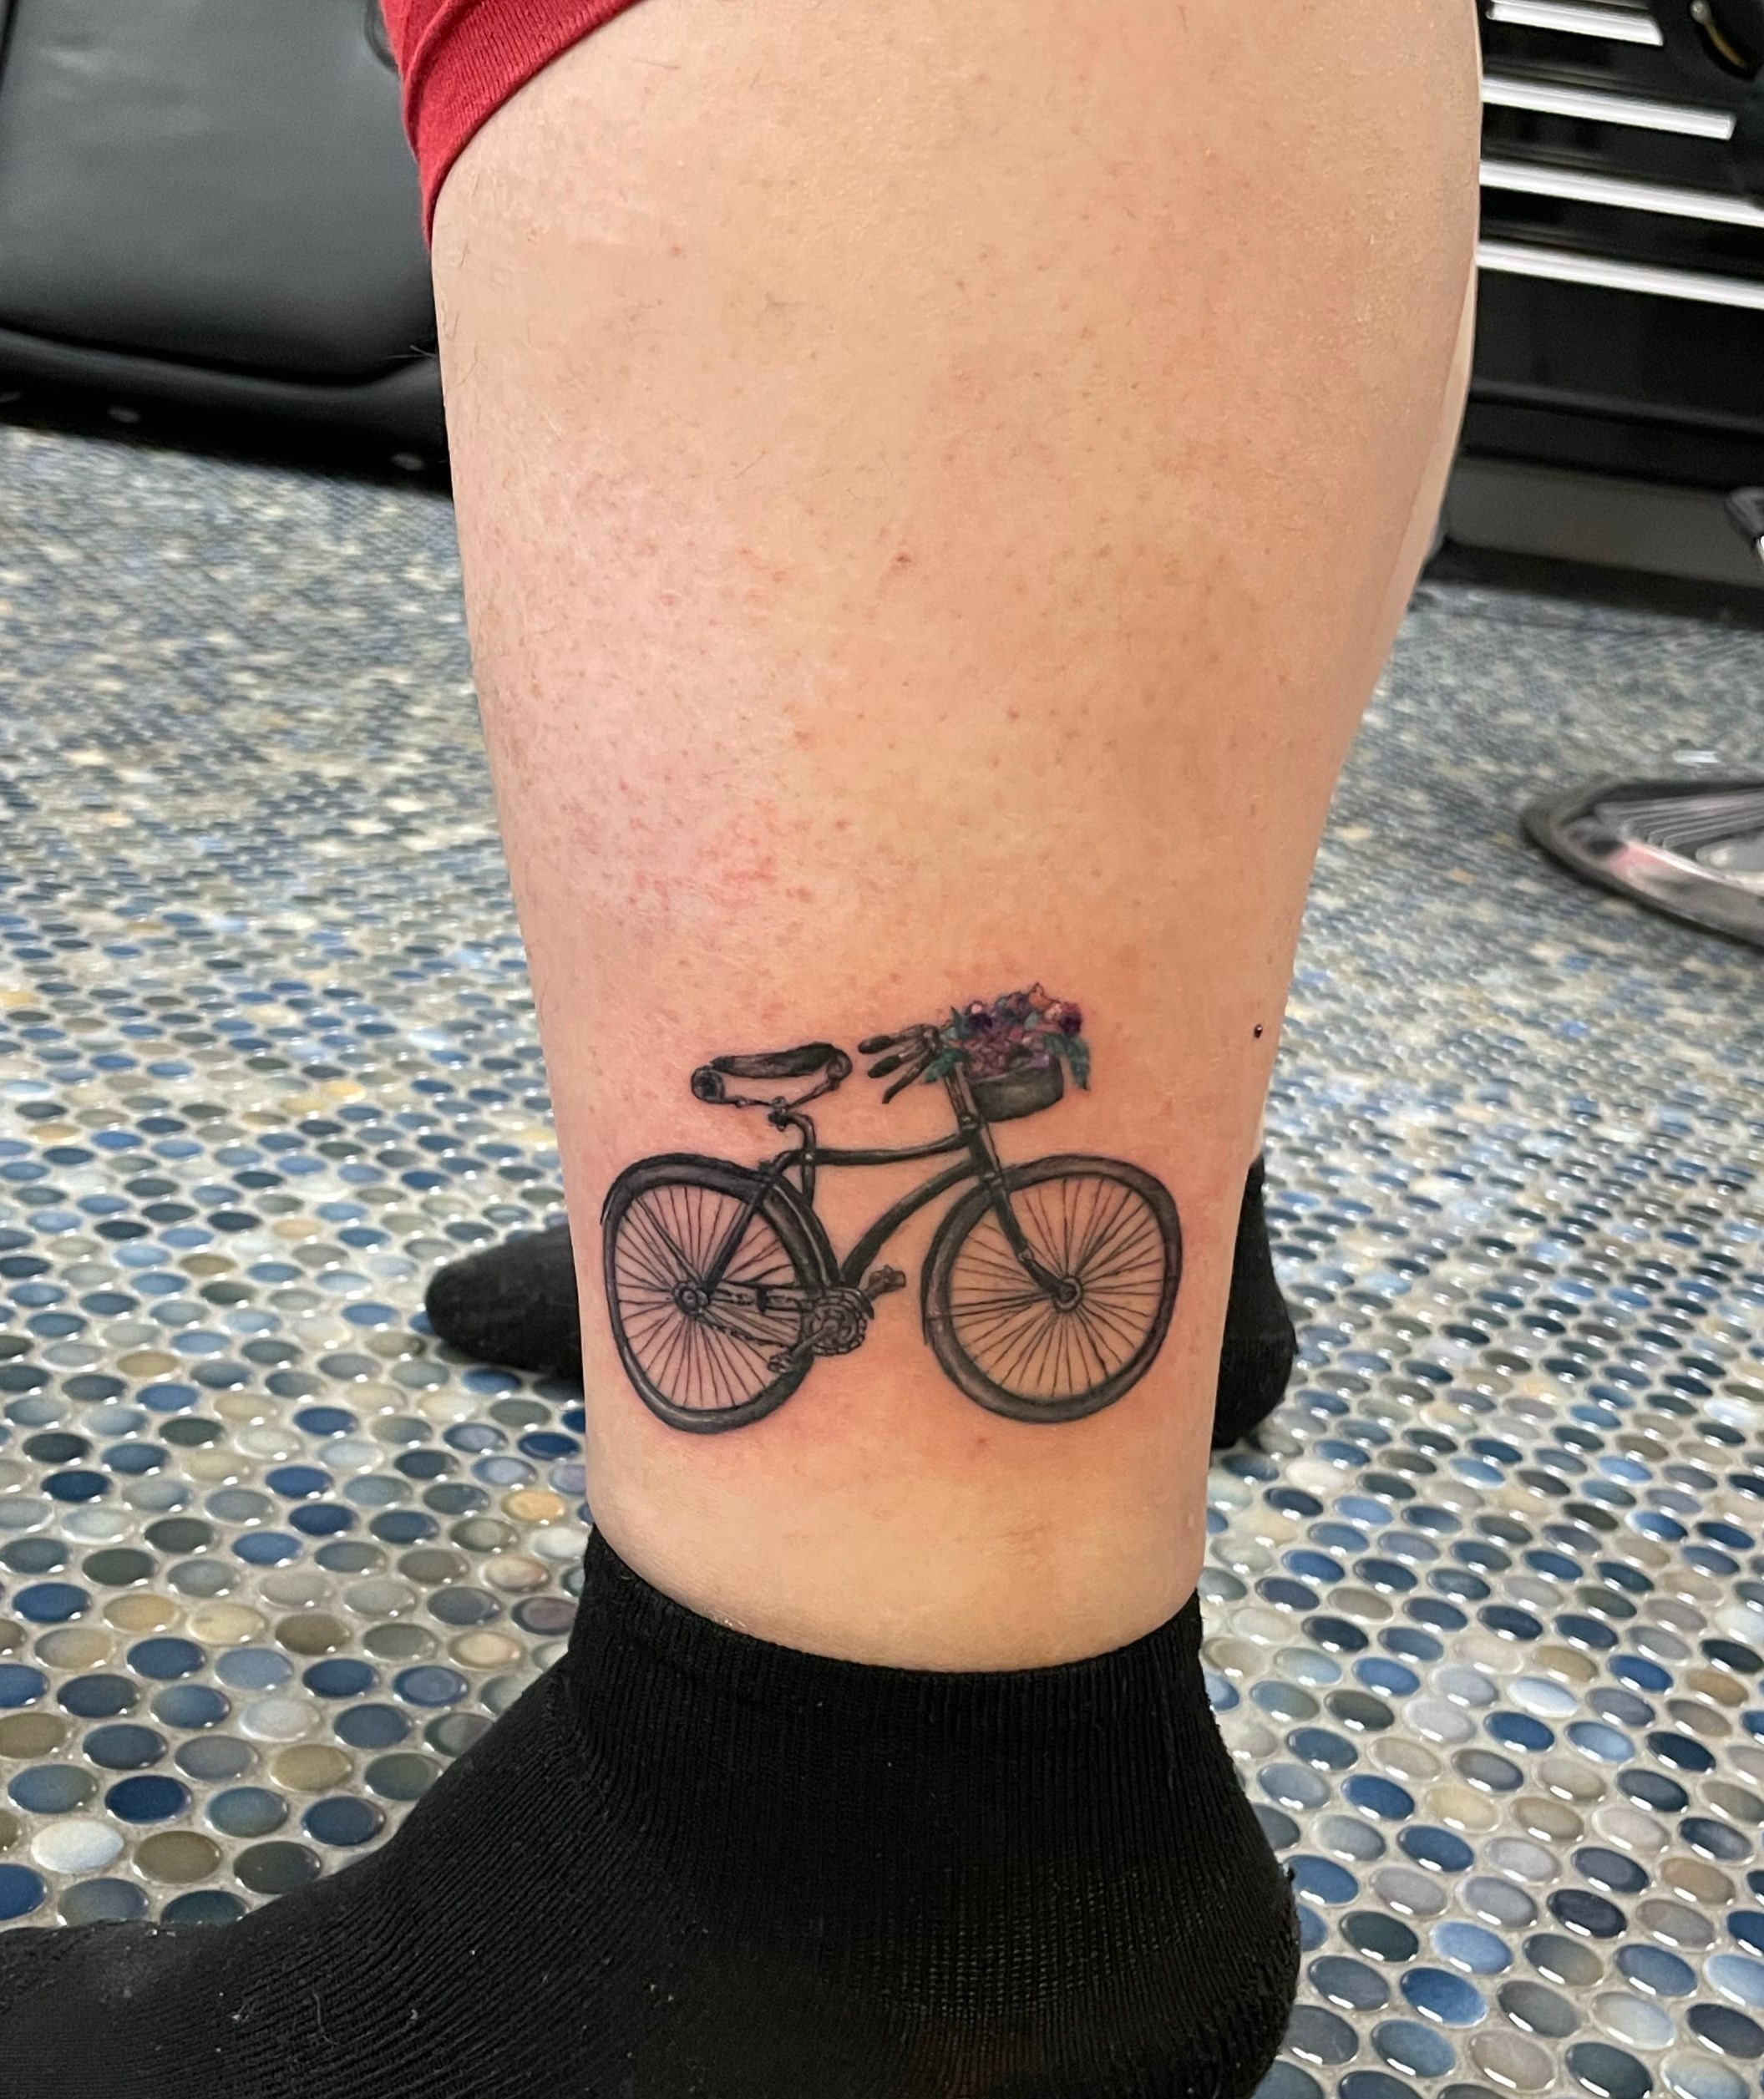 Just a friend riding his bike! Made for I's first tattoo! Thanks so much  for the trust (excuse the stubborn stencil) @badcompanyclub… | Instagram